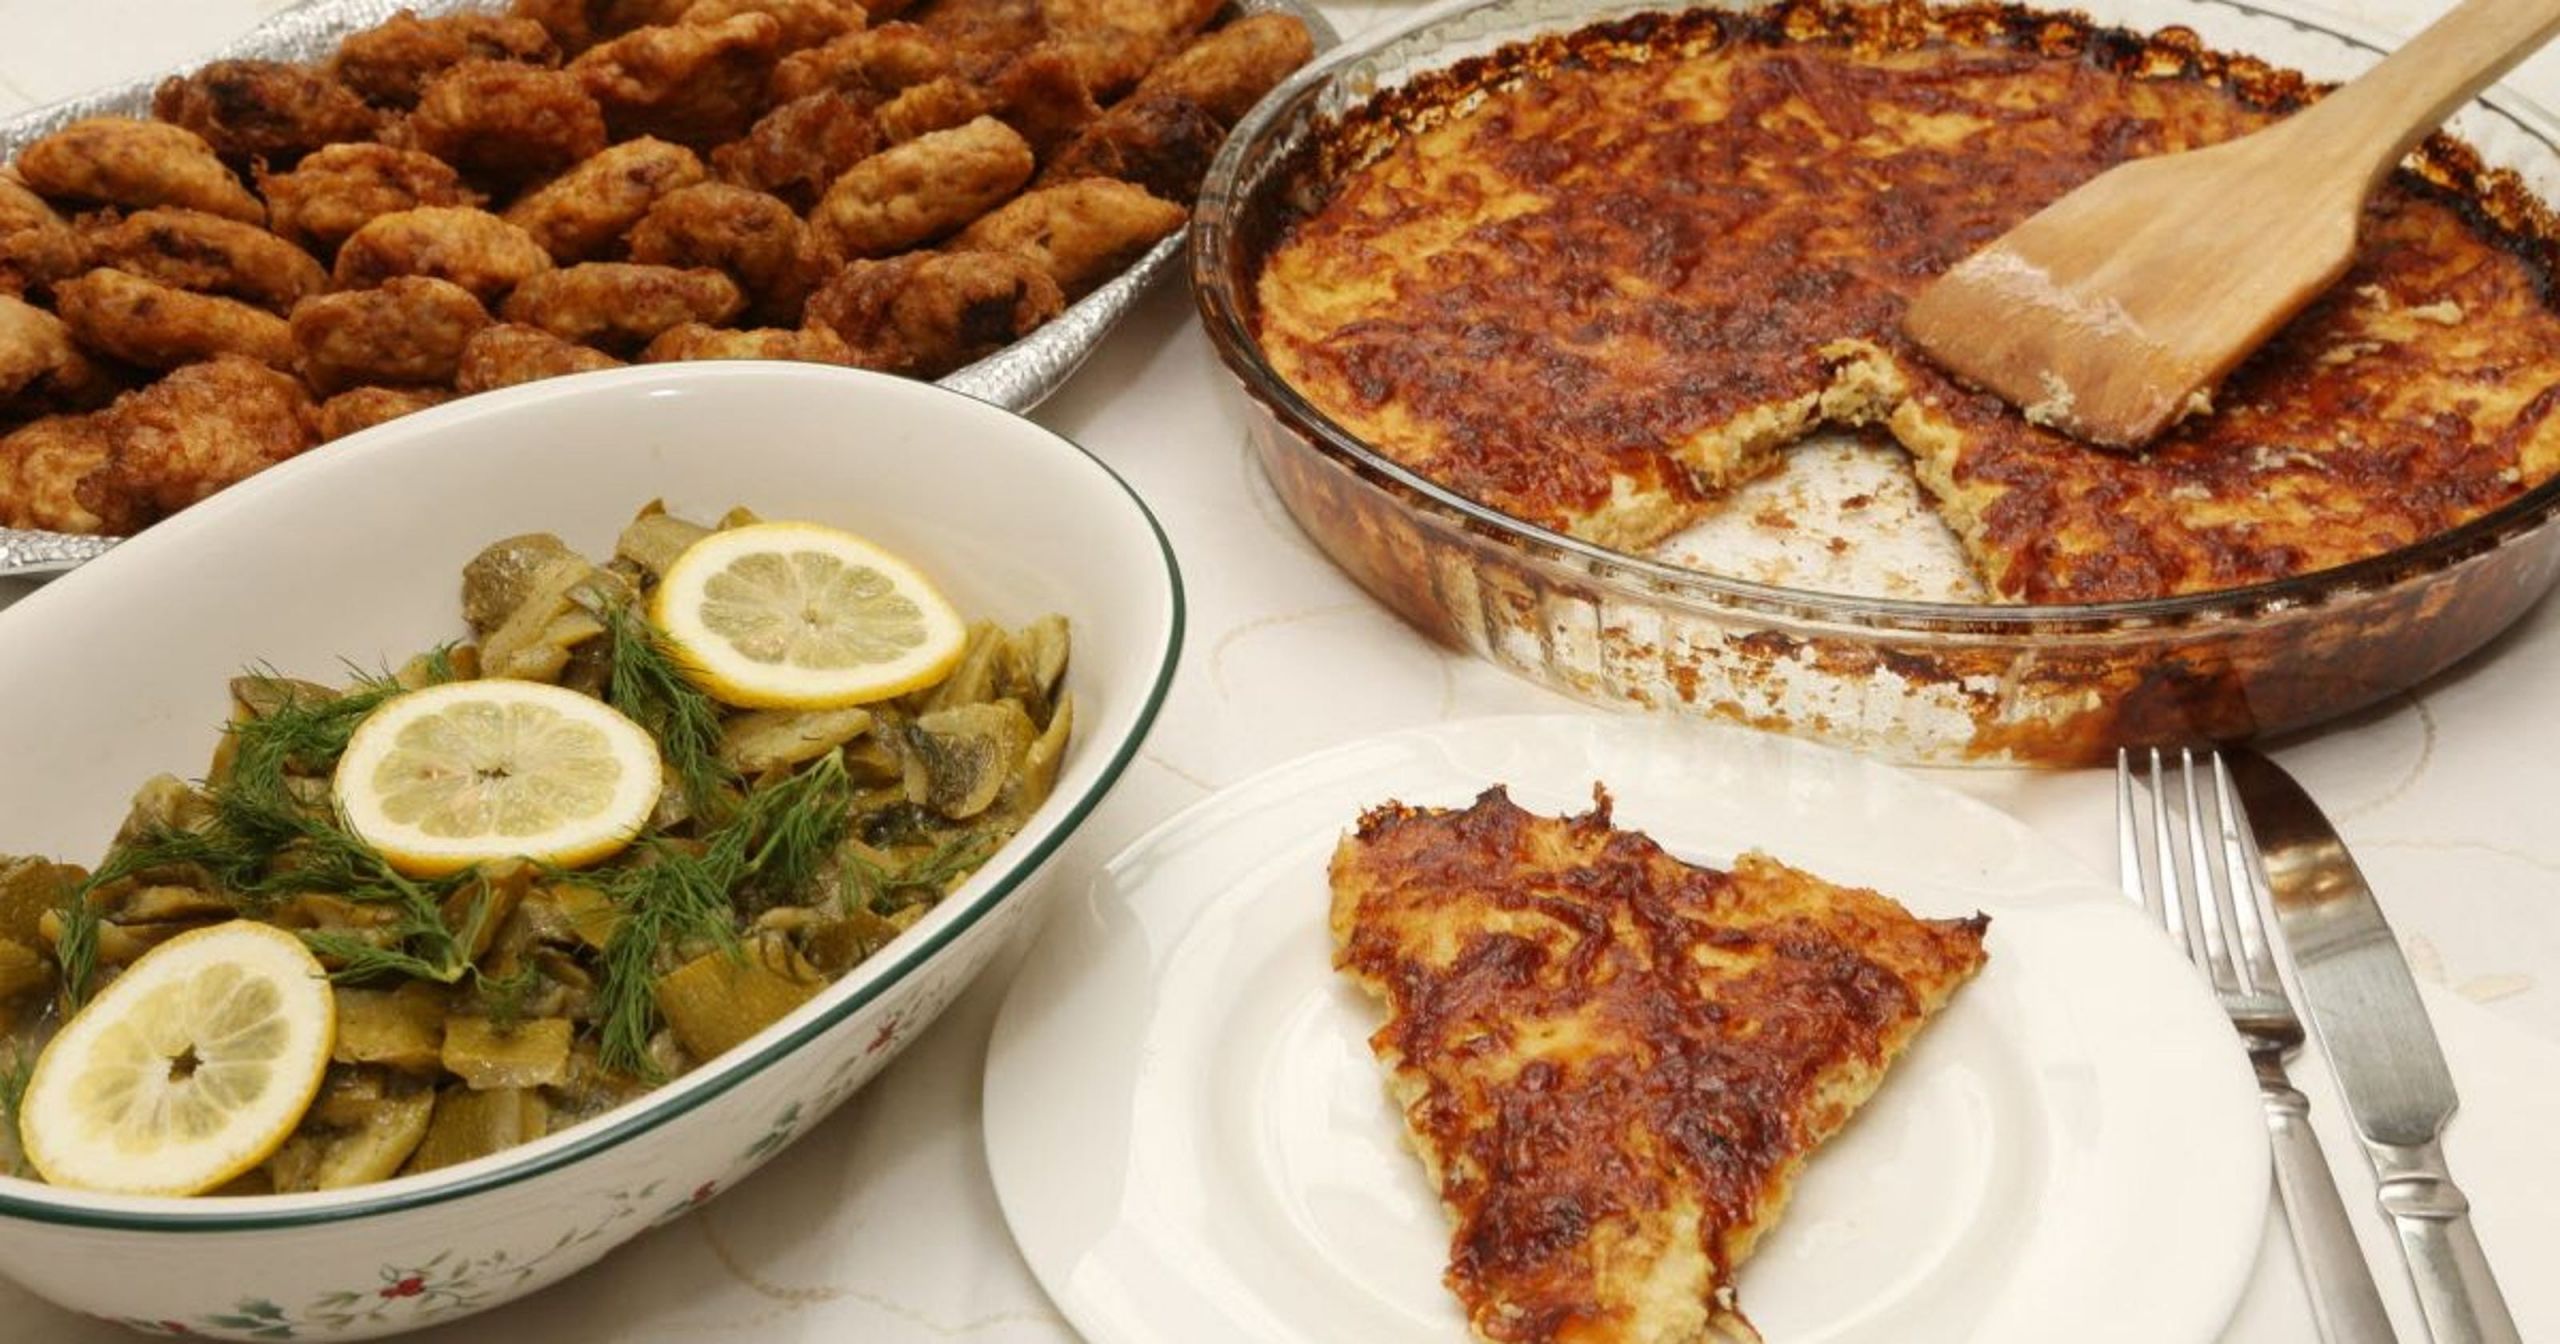 Passover Lunch Ideas
 Passover seder menu ideas with Sephardic flavors